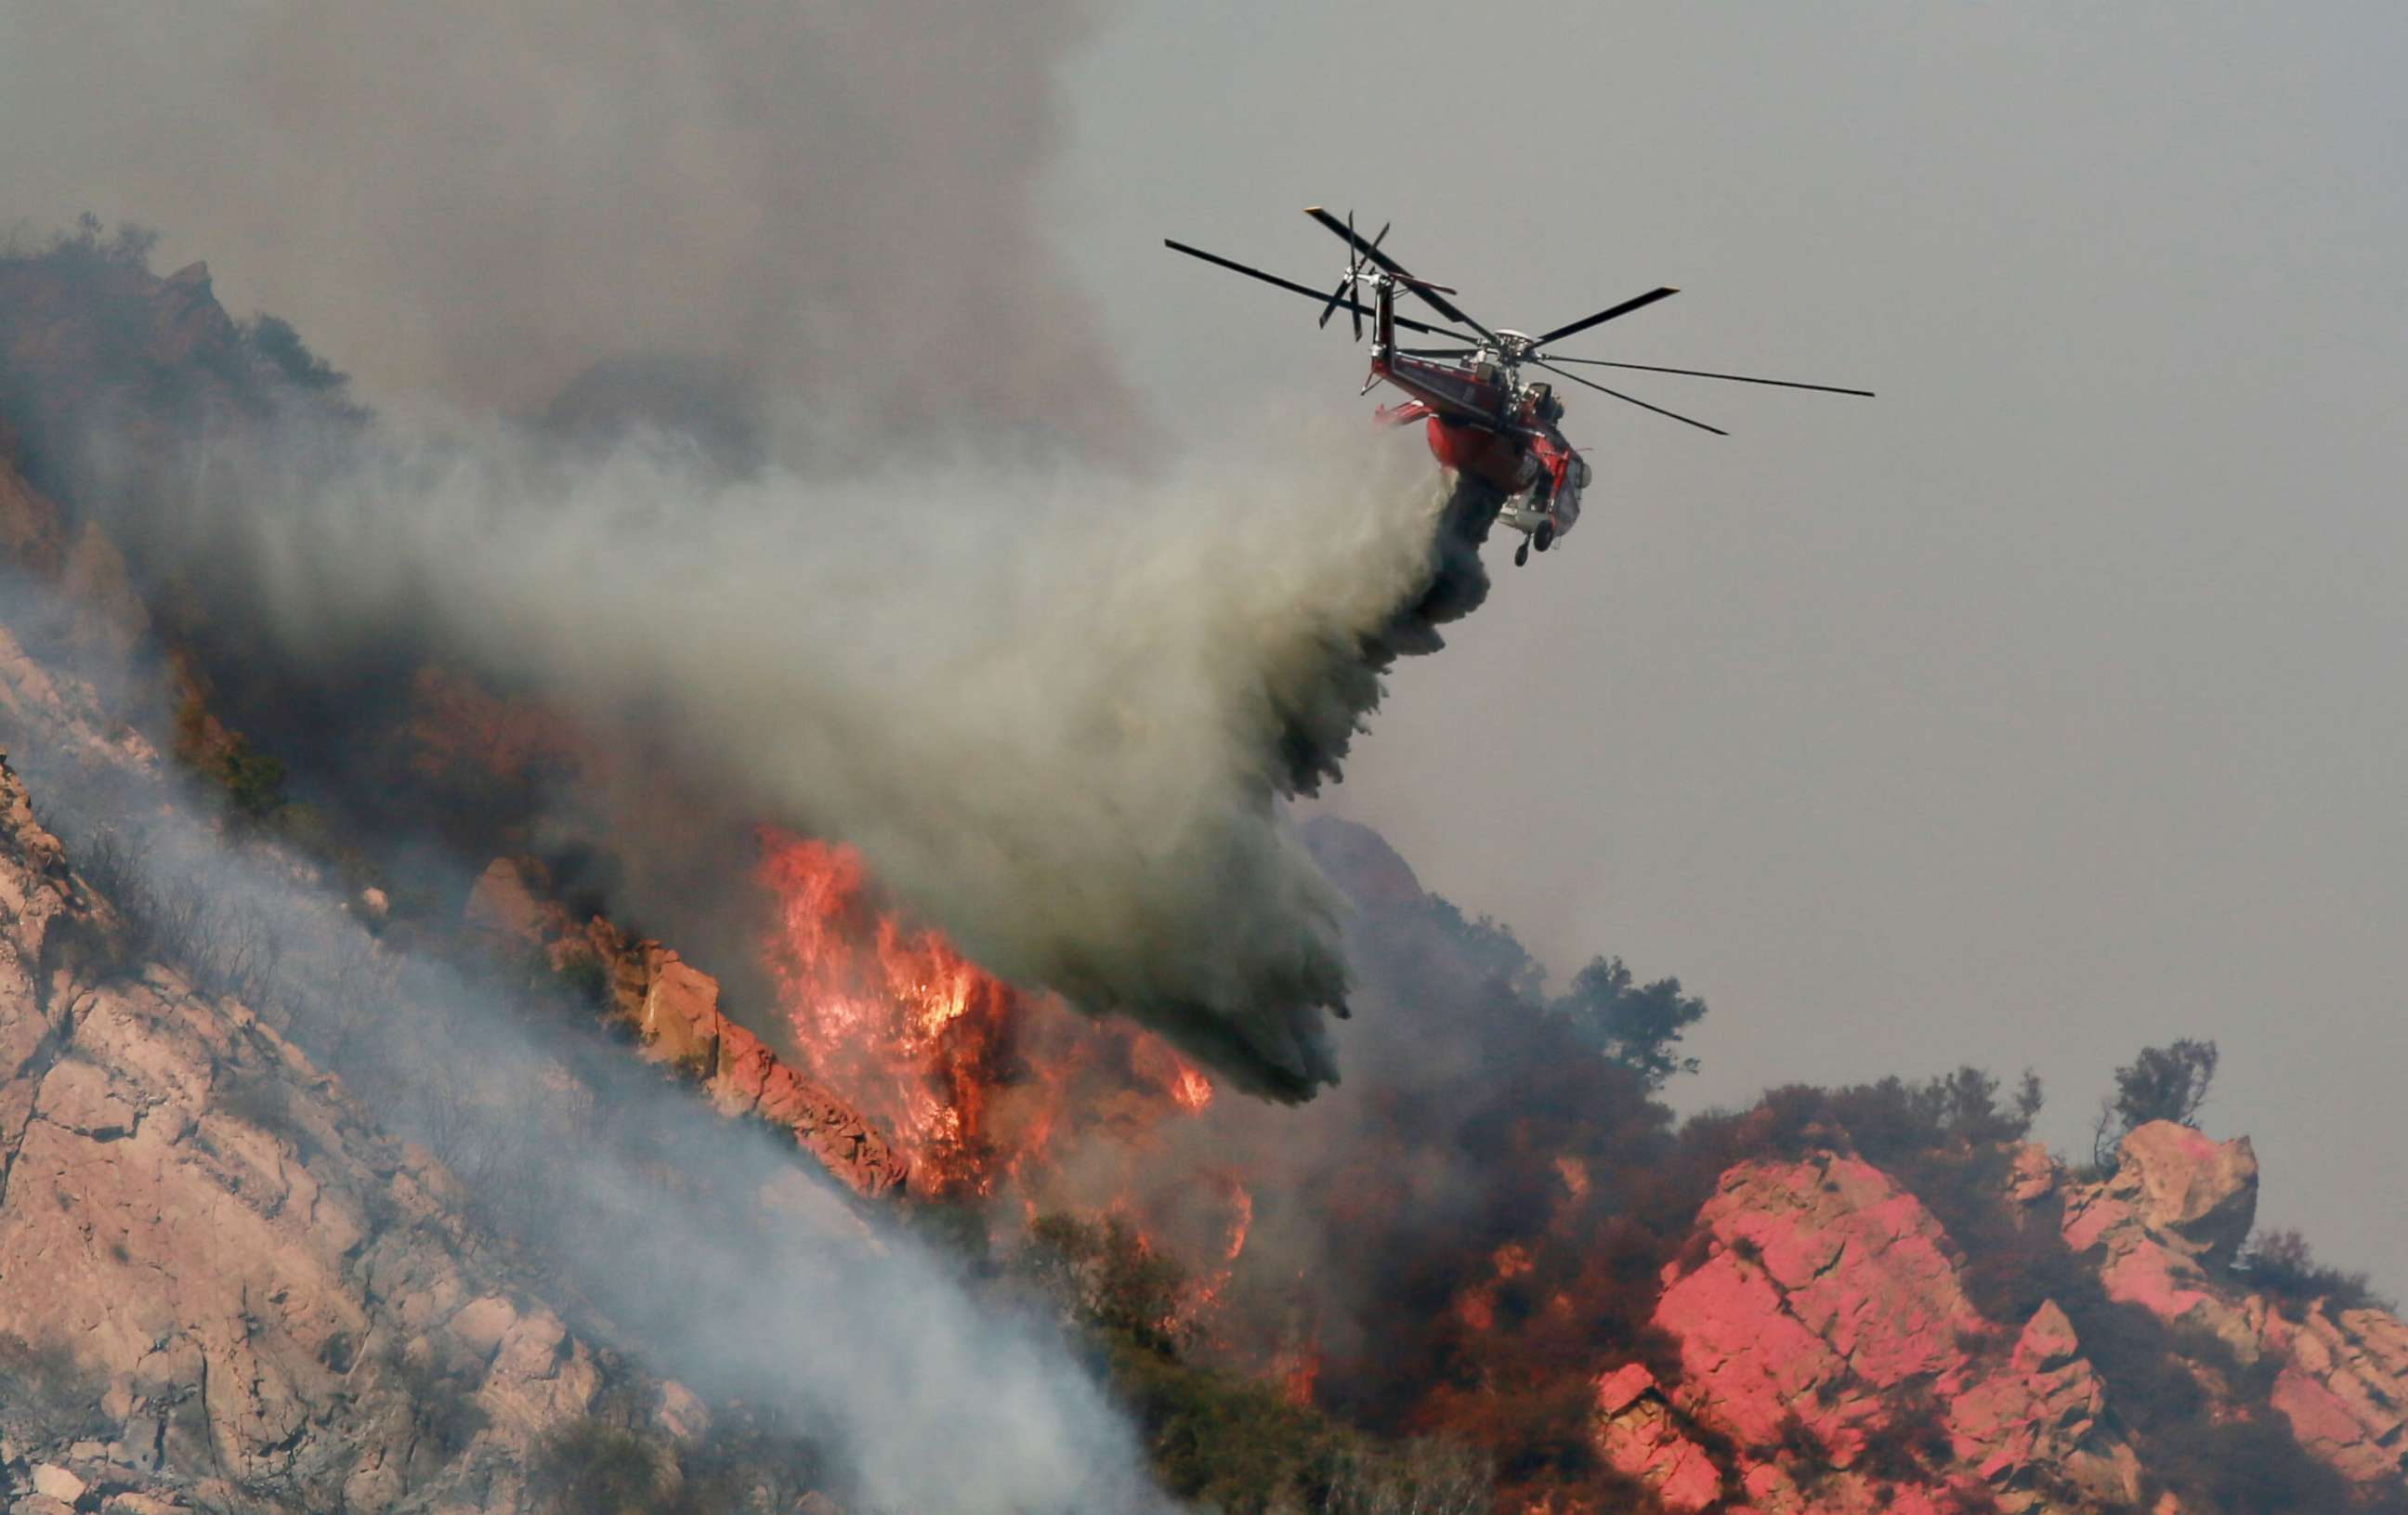 PHOTO: A helicopter drops flame retardant on a wildfire, Nov. 10, 2018, in Malibu, Calif. The Woolsey fire has burned over 70,000 acres and has reached the Pacific Coast as it continues grow.